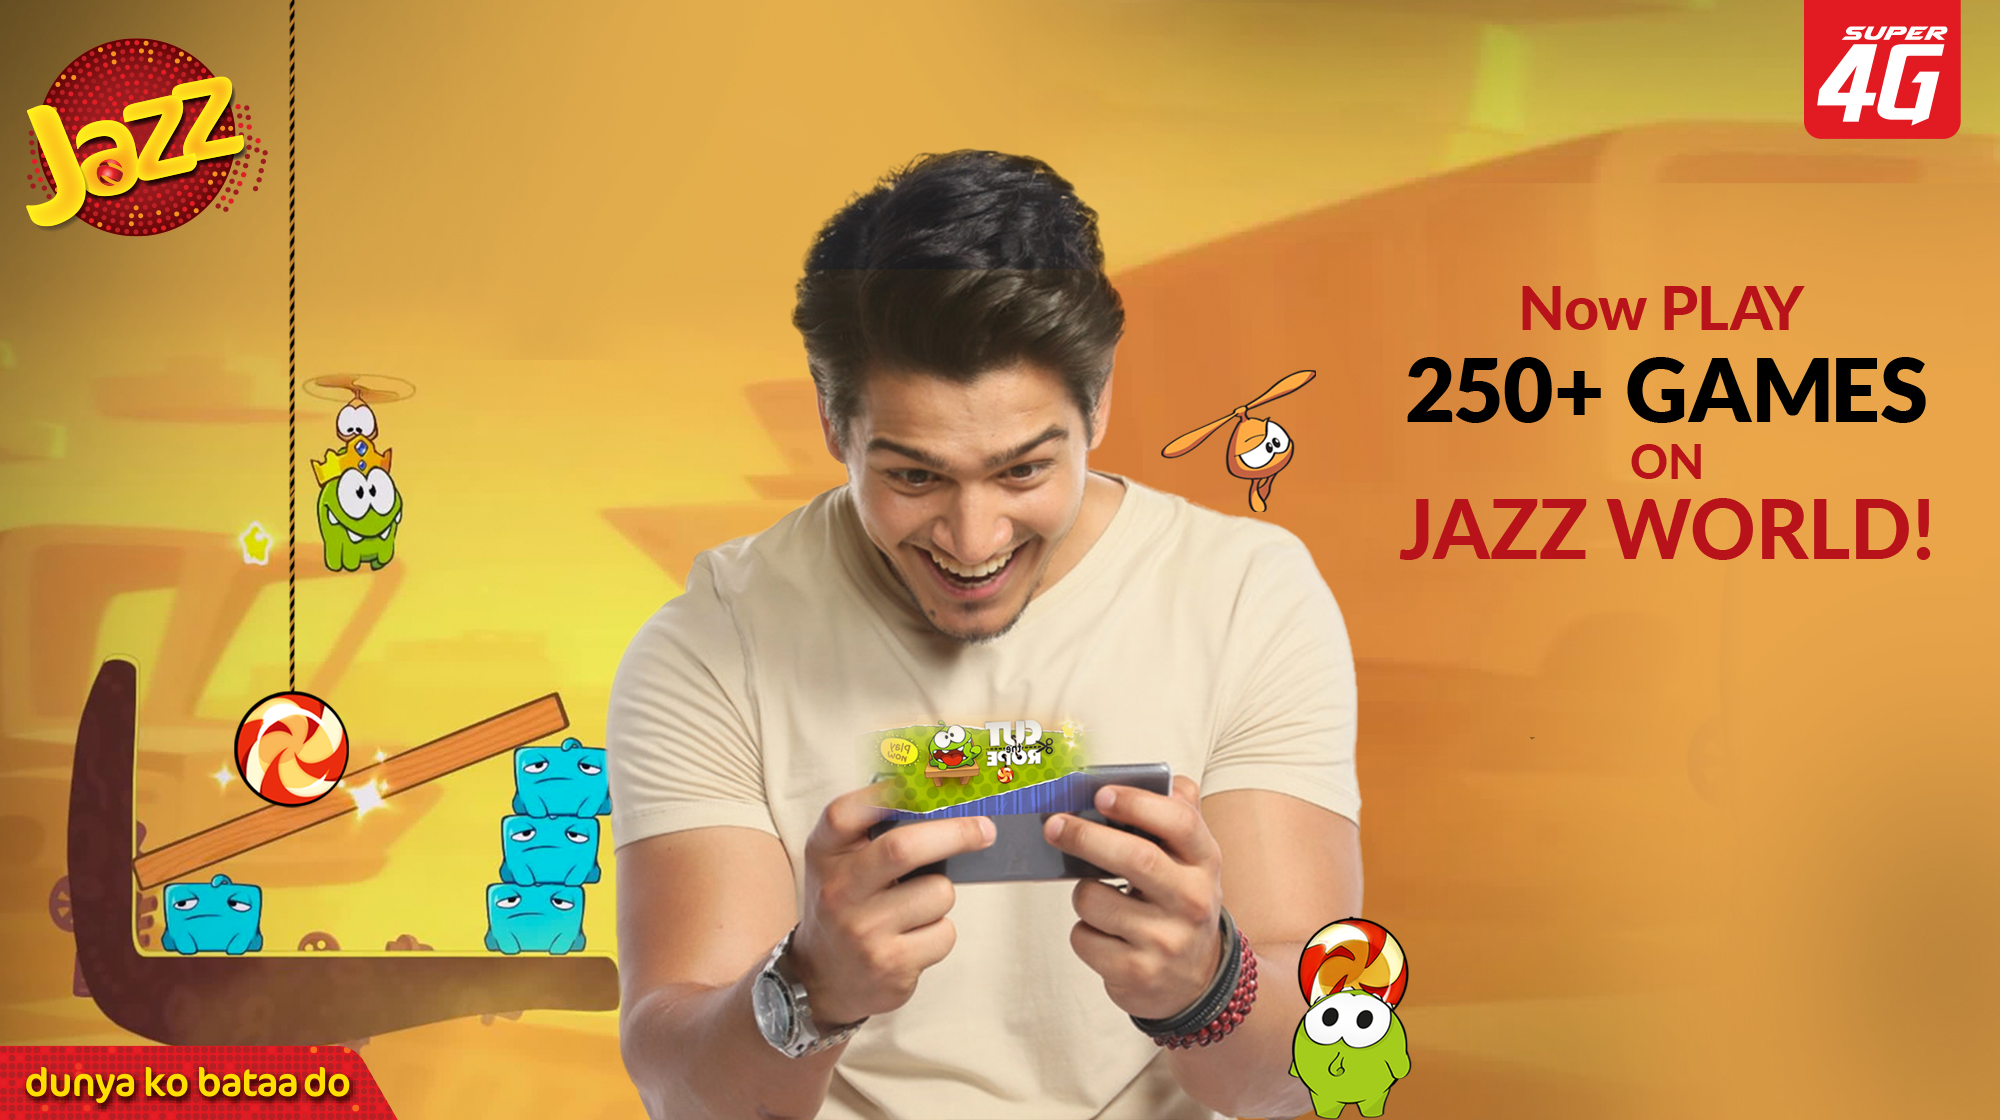 Jazz 250 Games now Available